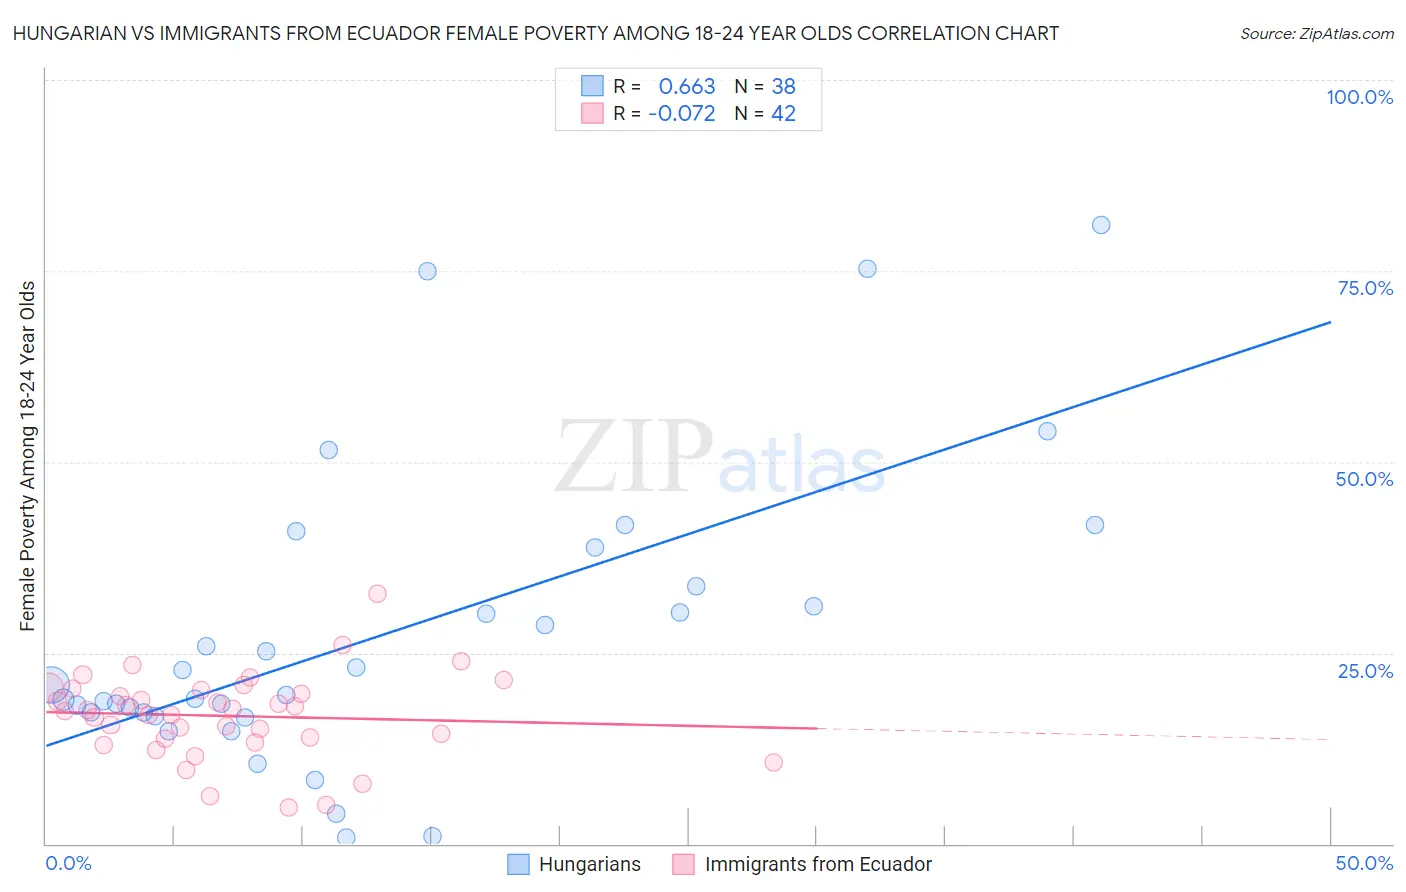 Hungarian vs Immigrants from Ecuador Female Poverty Among 18-24 Year Olds